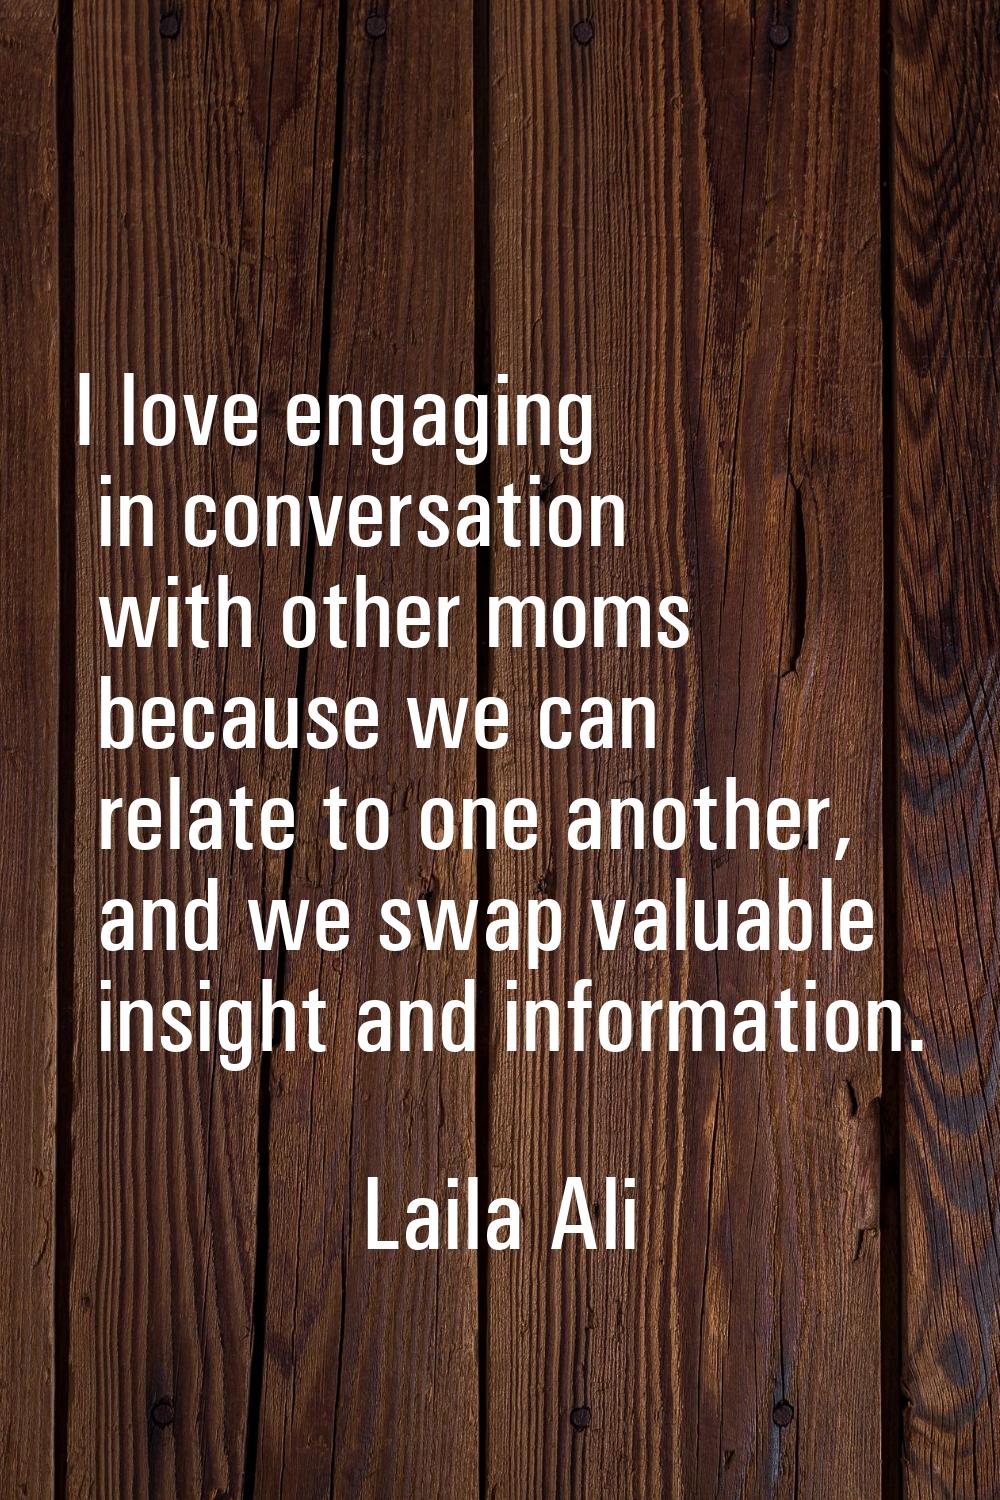 I love engaging in conversation with other moms because we can relate to one another, and we swap v